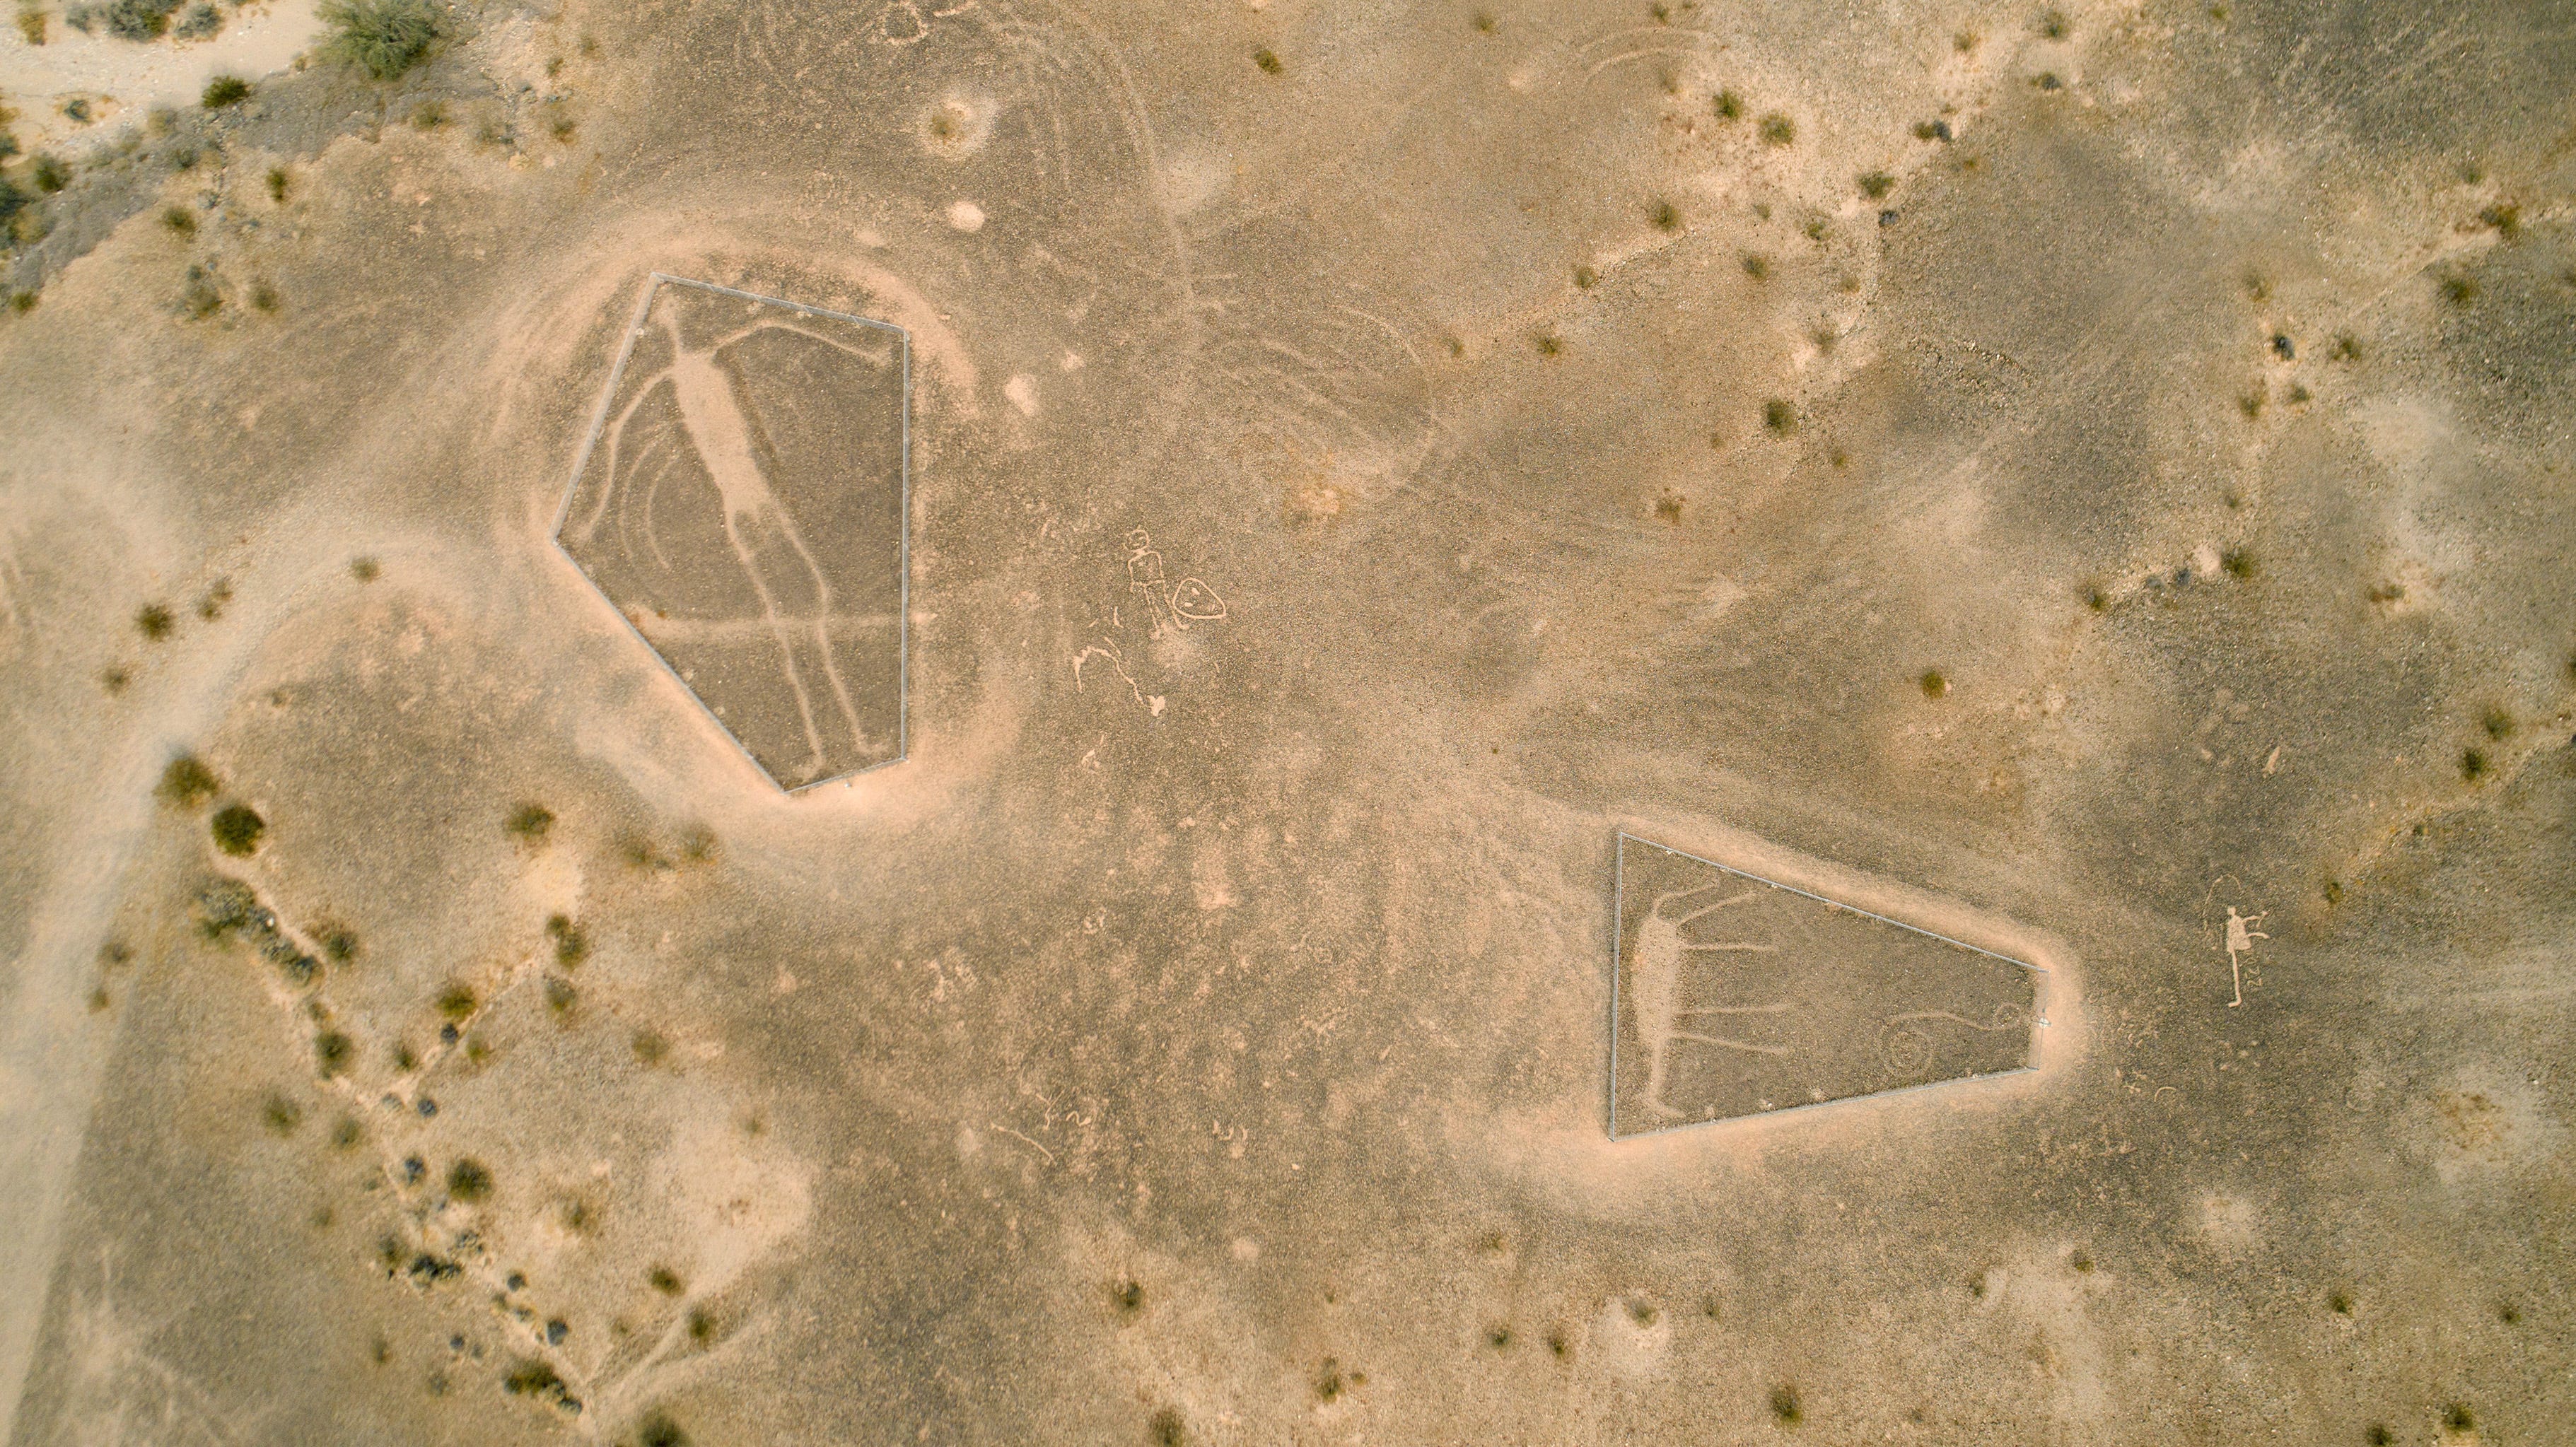 The Blythe intaglios were created on the desert floor hundreds if not thousands of years ago by native people for an unknown reason. The tribes view this land as sacred and want to preserve it for future generations. The one on the left appears to be a human figure while the one on the right appears to be an animal.